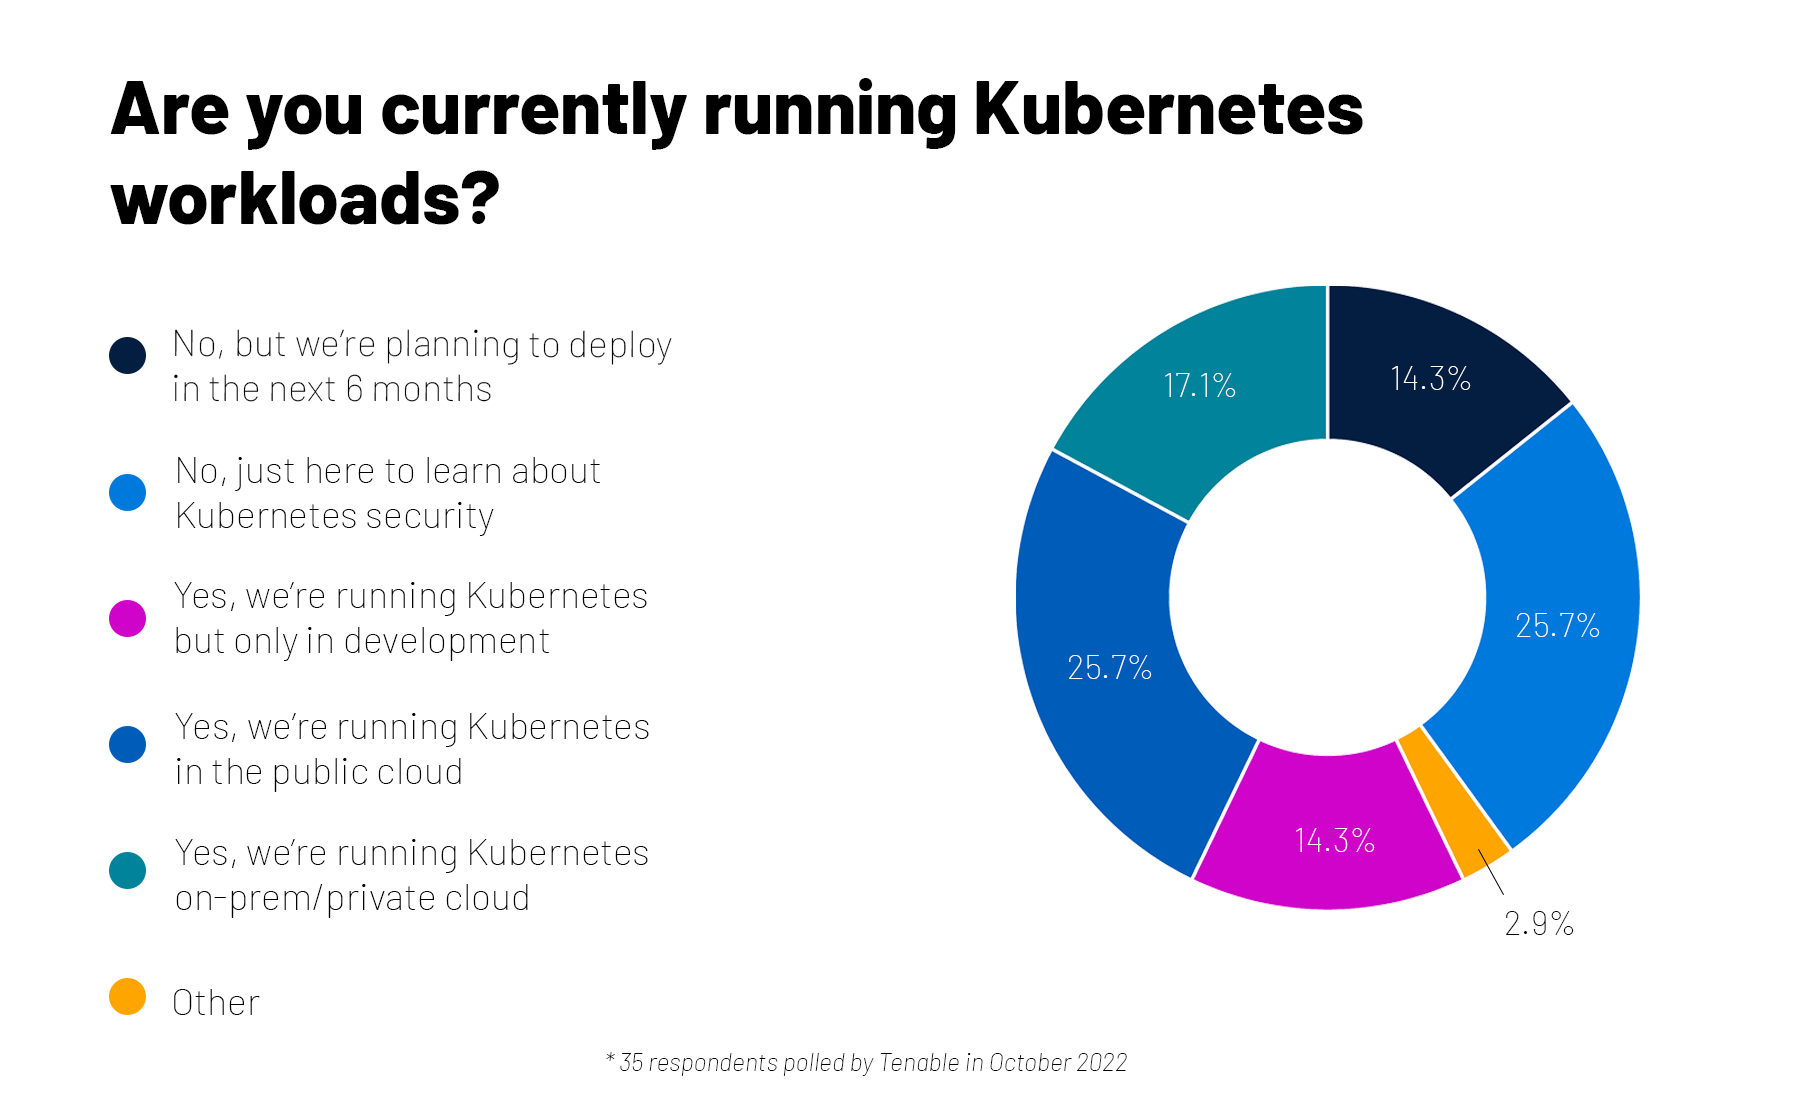 A quick check on Kubernetes security